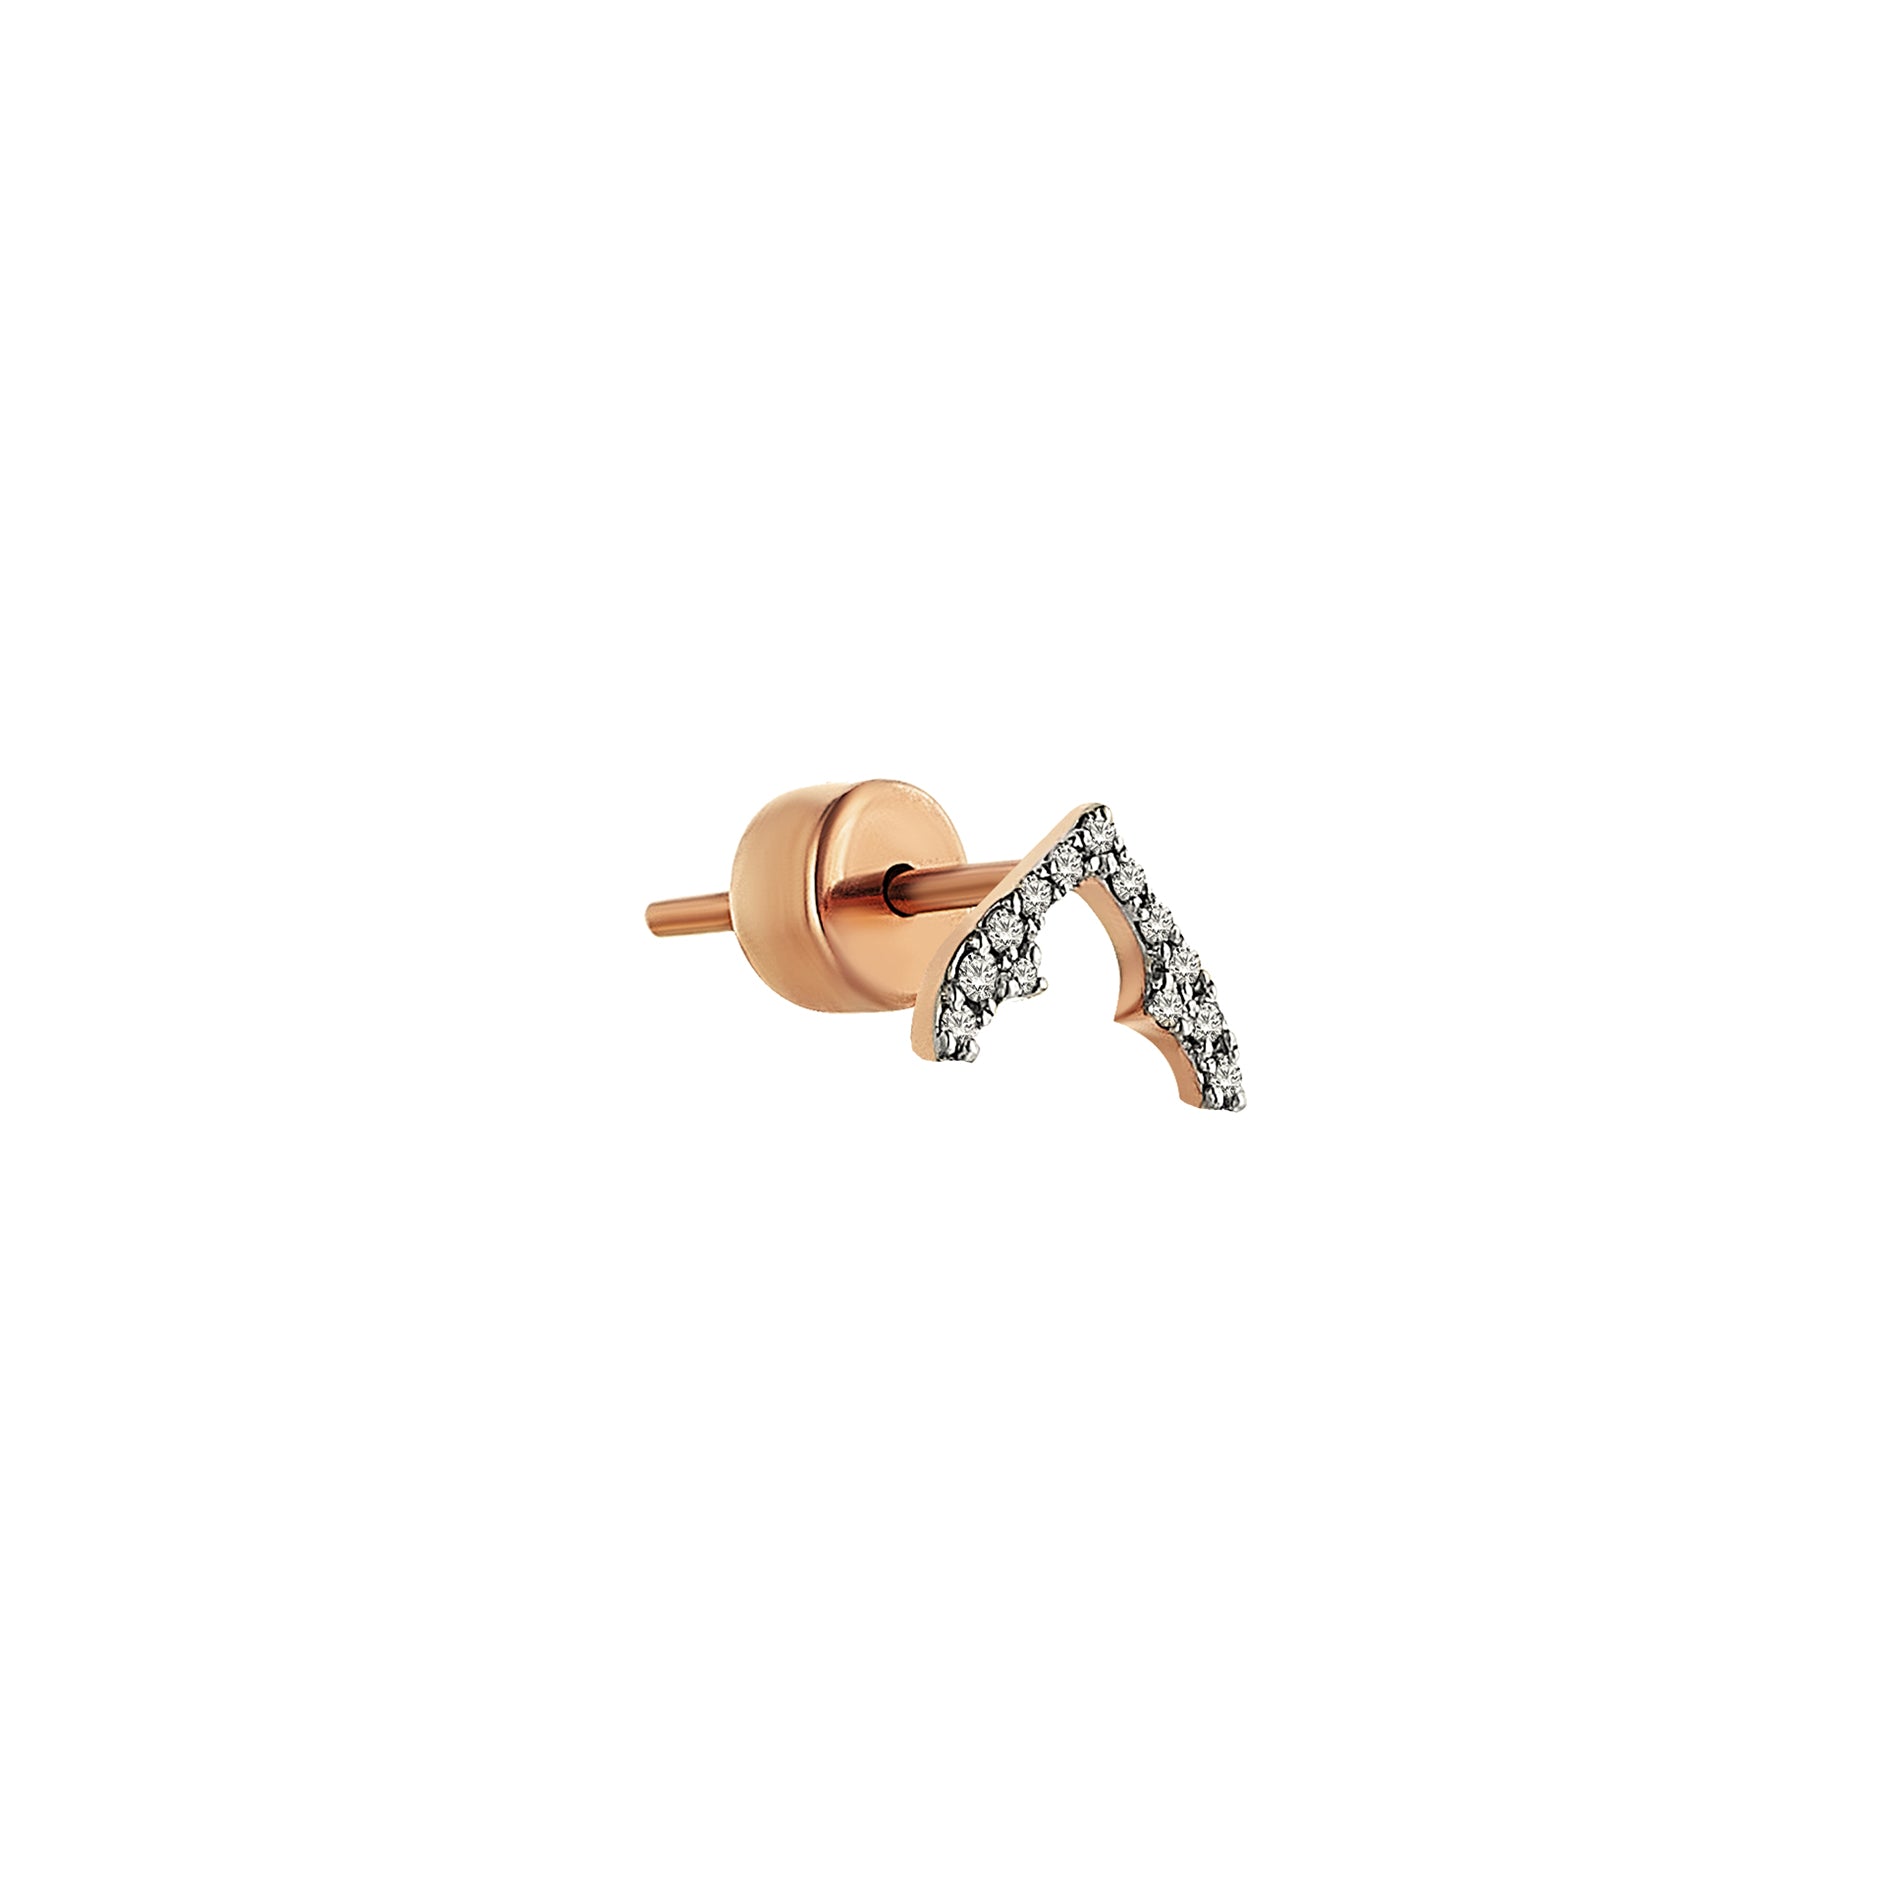 Pointed Trefoil Arch Earring in Rose Gold - Her Story Shop